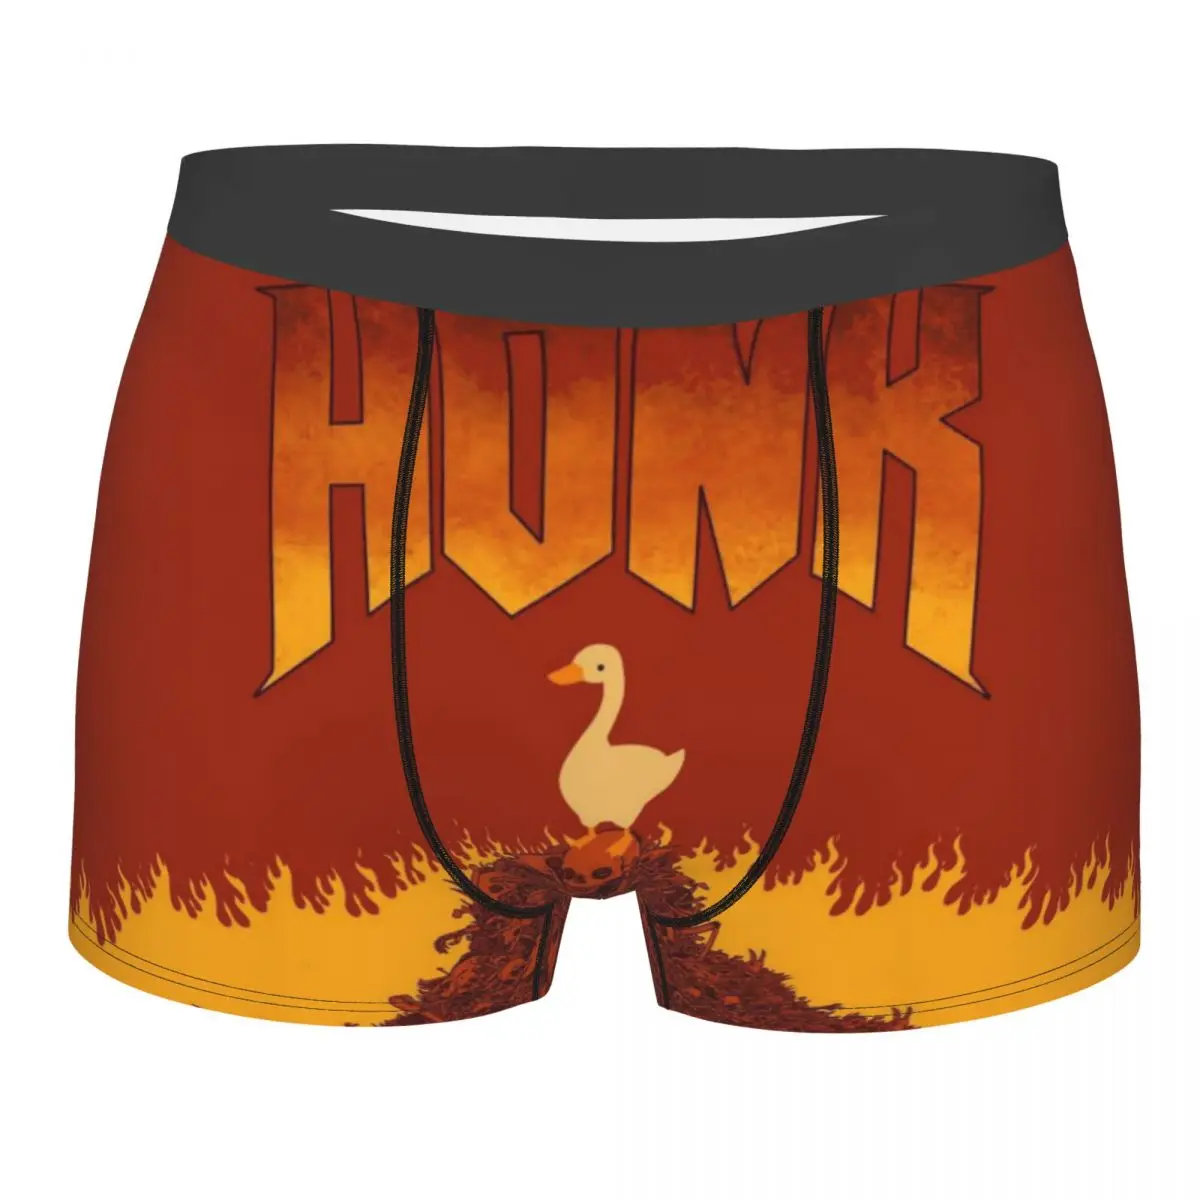 

Hunk Man's Boxer Briefs Untitled Goose Farm Sandbox Game Highly Breathable Underwear High Quality Print Shorts Gift Idea